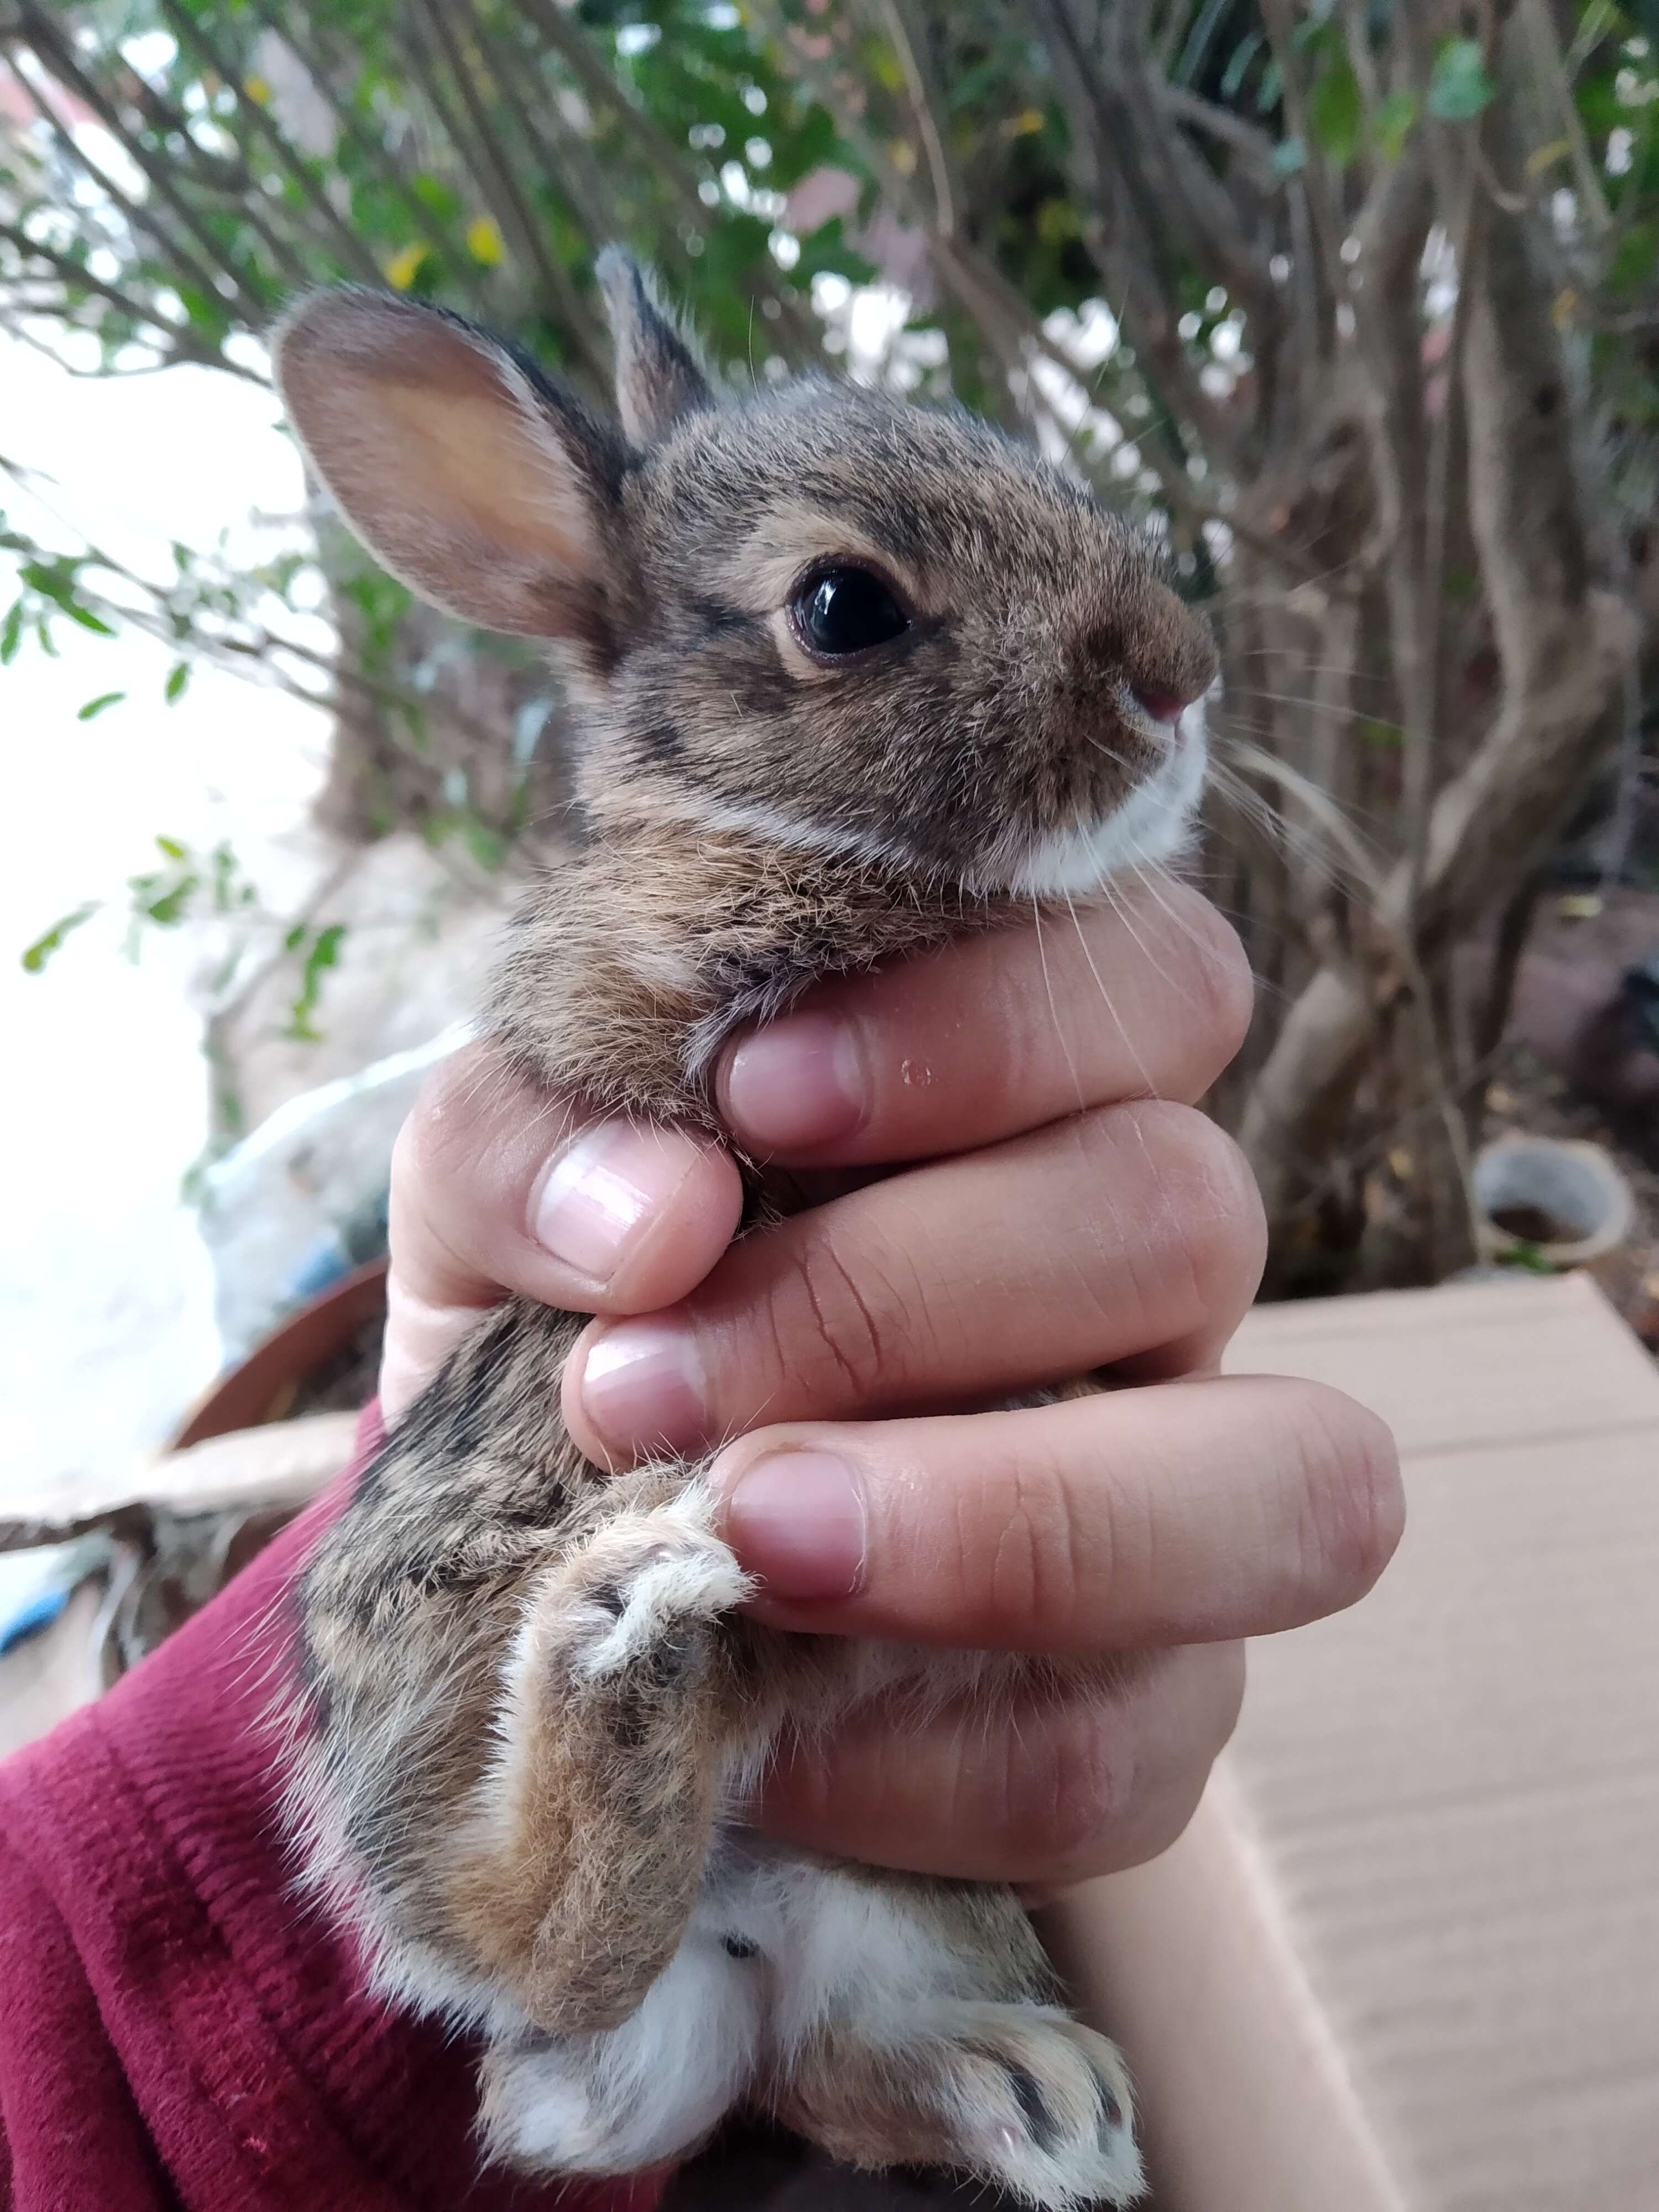 Image of Mexican Cottontail